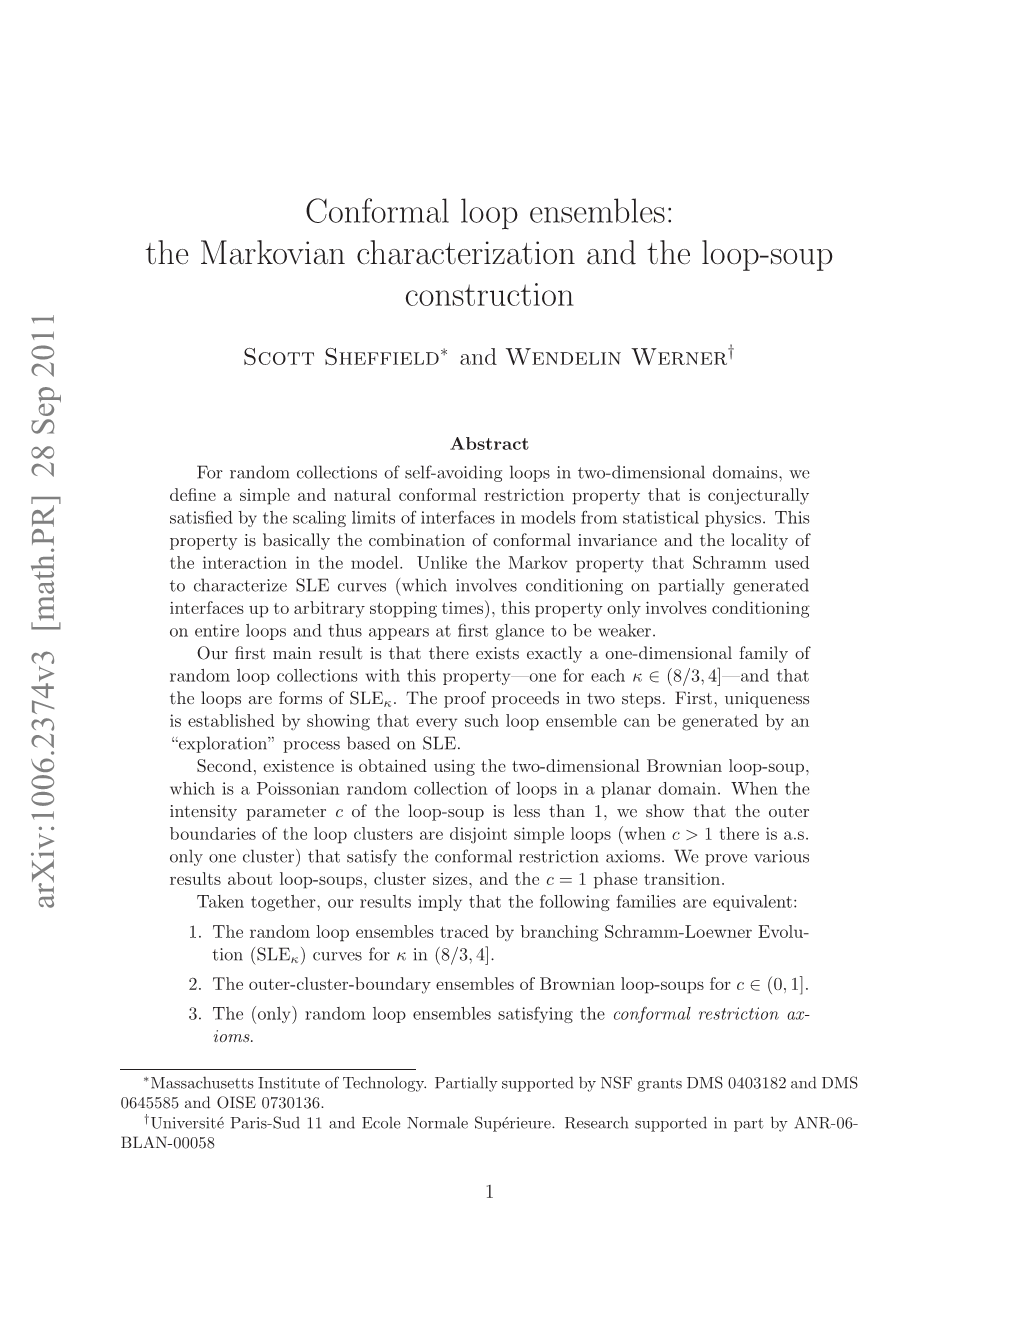 Conformal Loop Ensembles: the Markovian Characterization and The